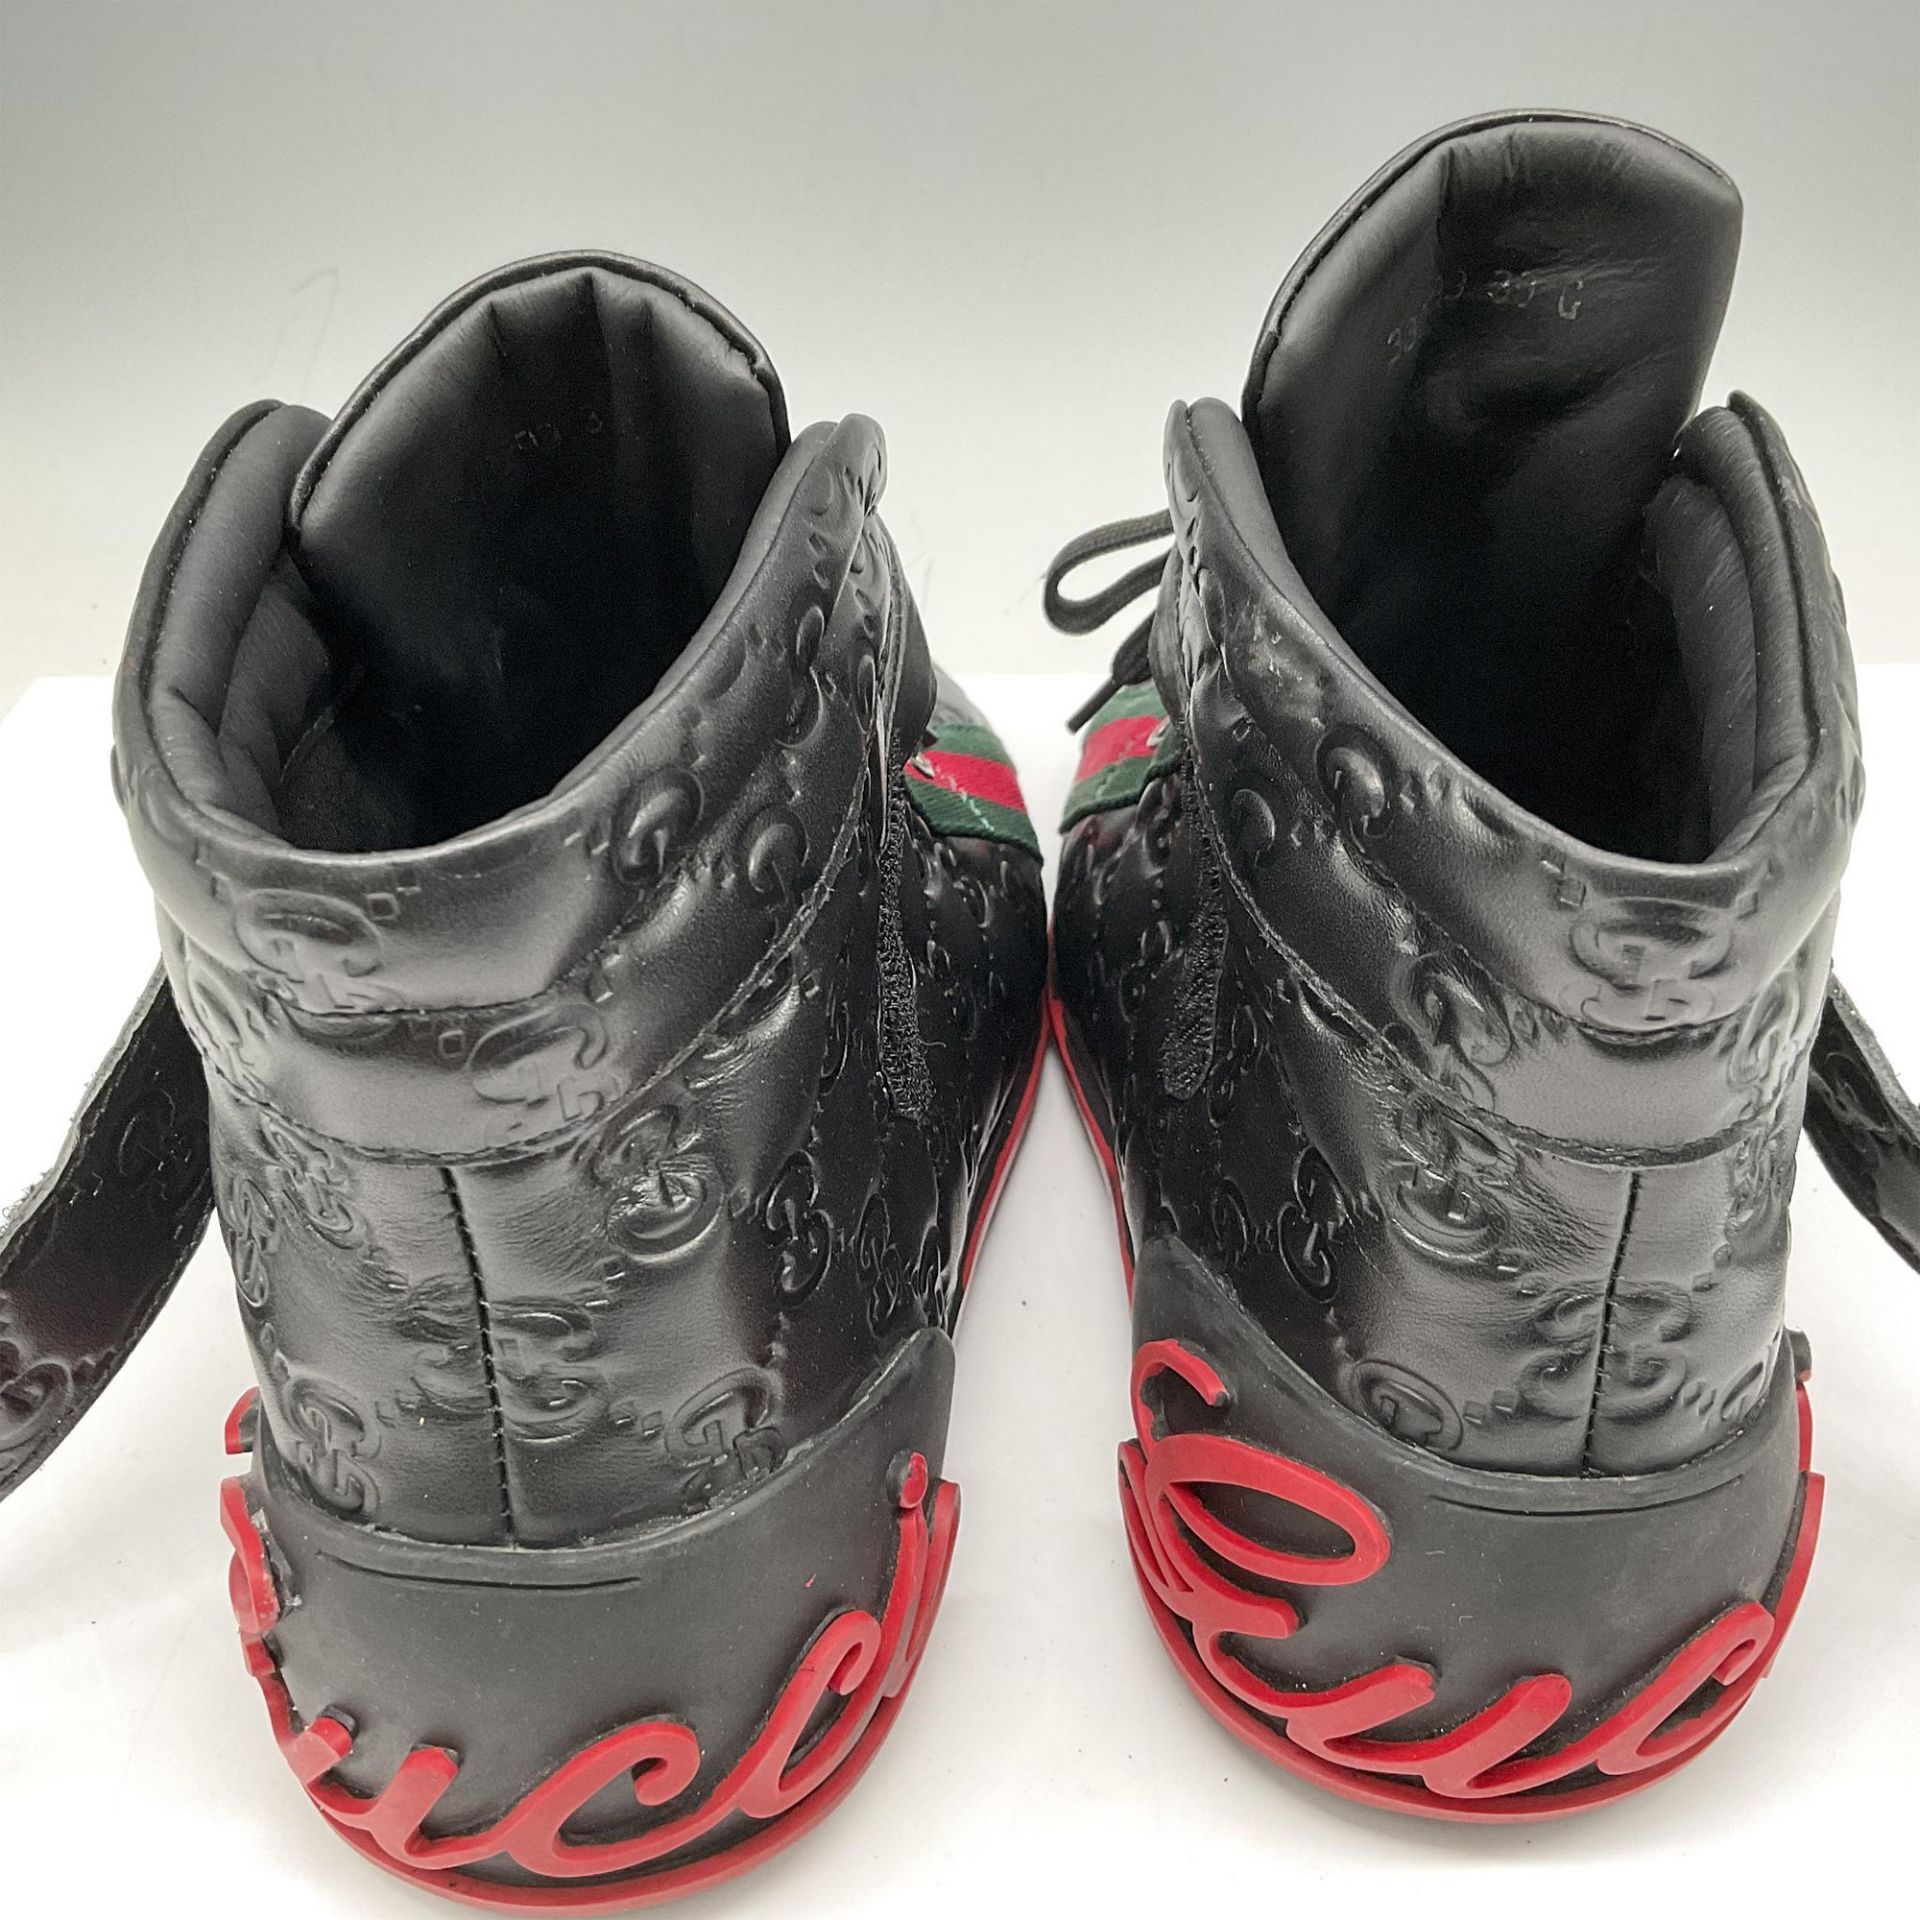 Gucci High Top Sneakers, Off The Grid, Size 39/8 - Image 3 of 5